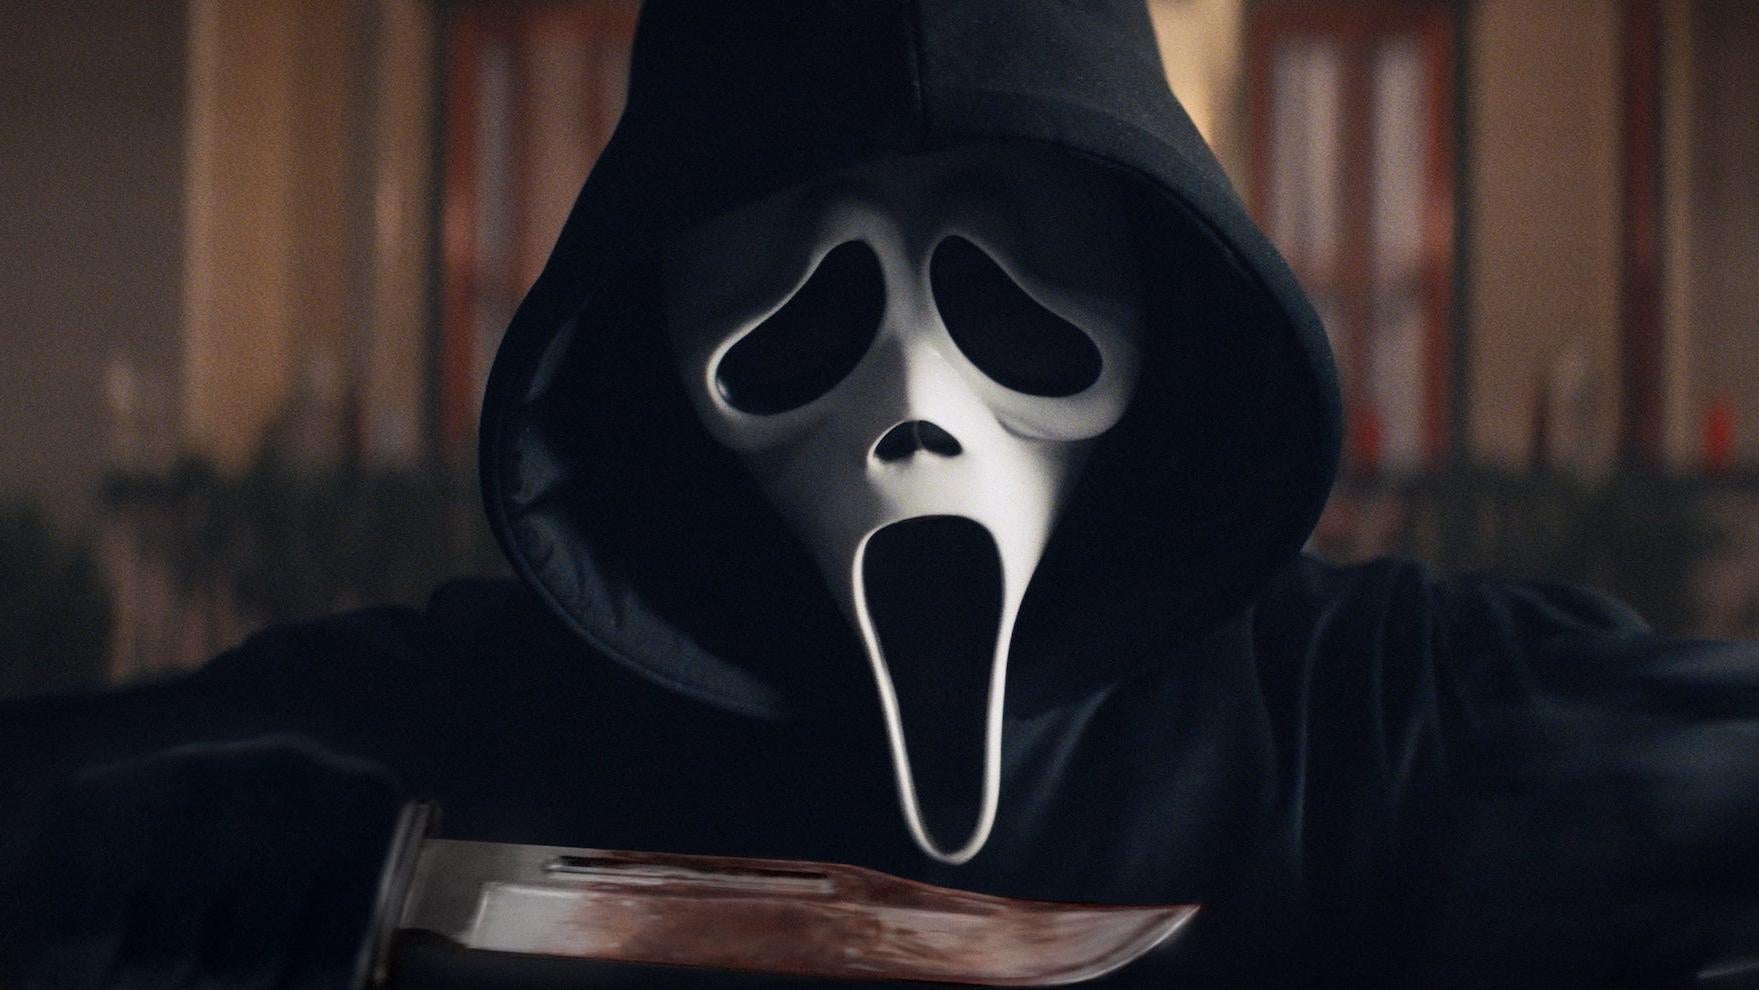 Who is behind the mask? (Image: Paramount)